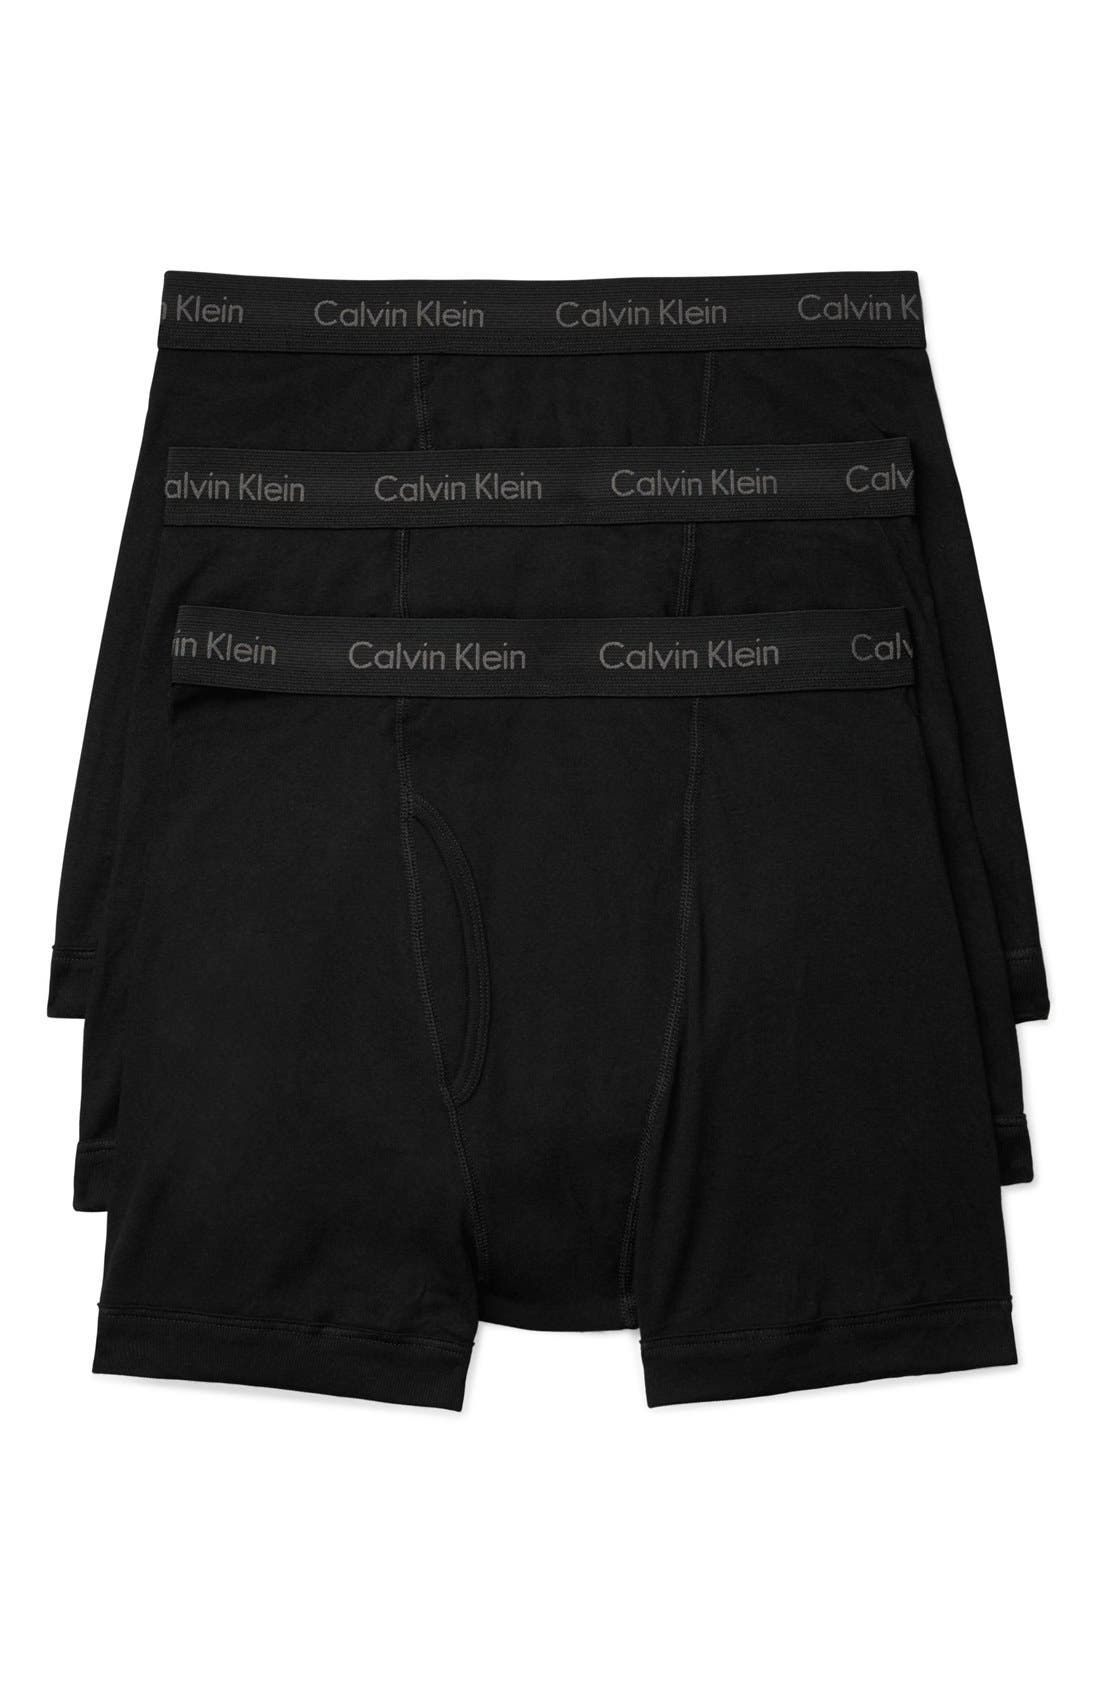 UPC 608279055365 product image for Men's Calvin Klein 3-Pack Boxer Briefs, Size Small - Black | upcitemdb.com